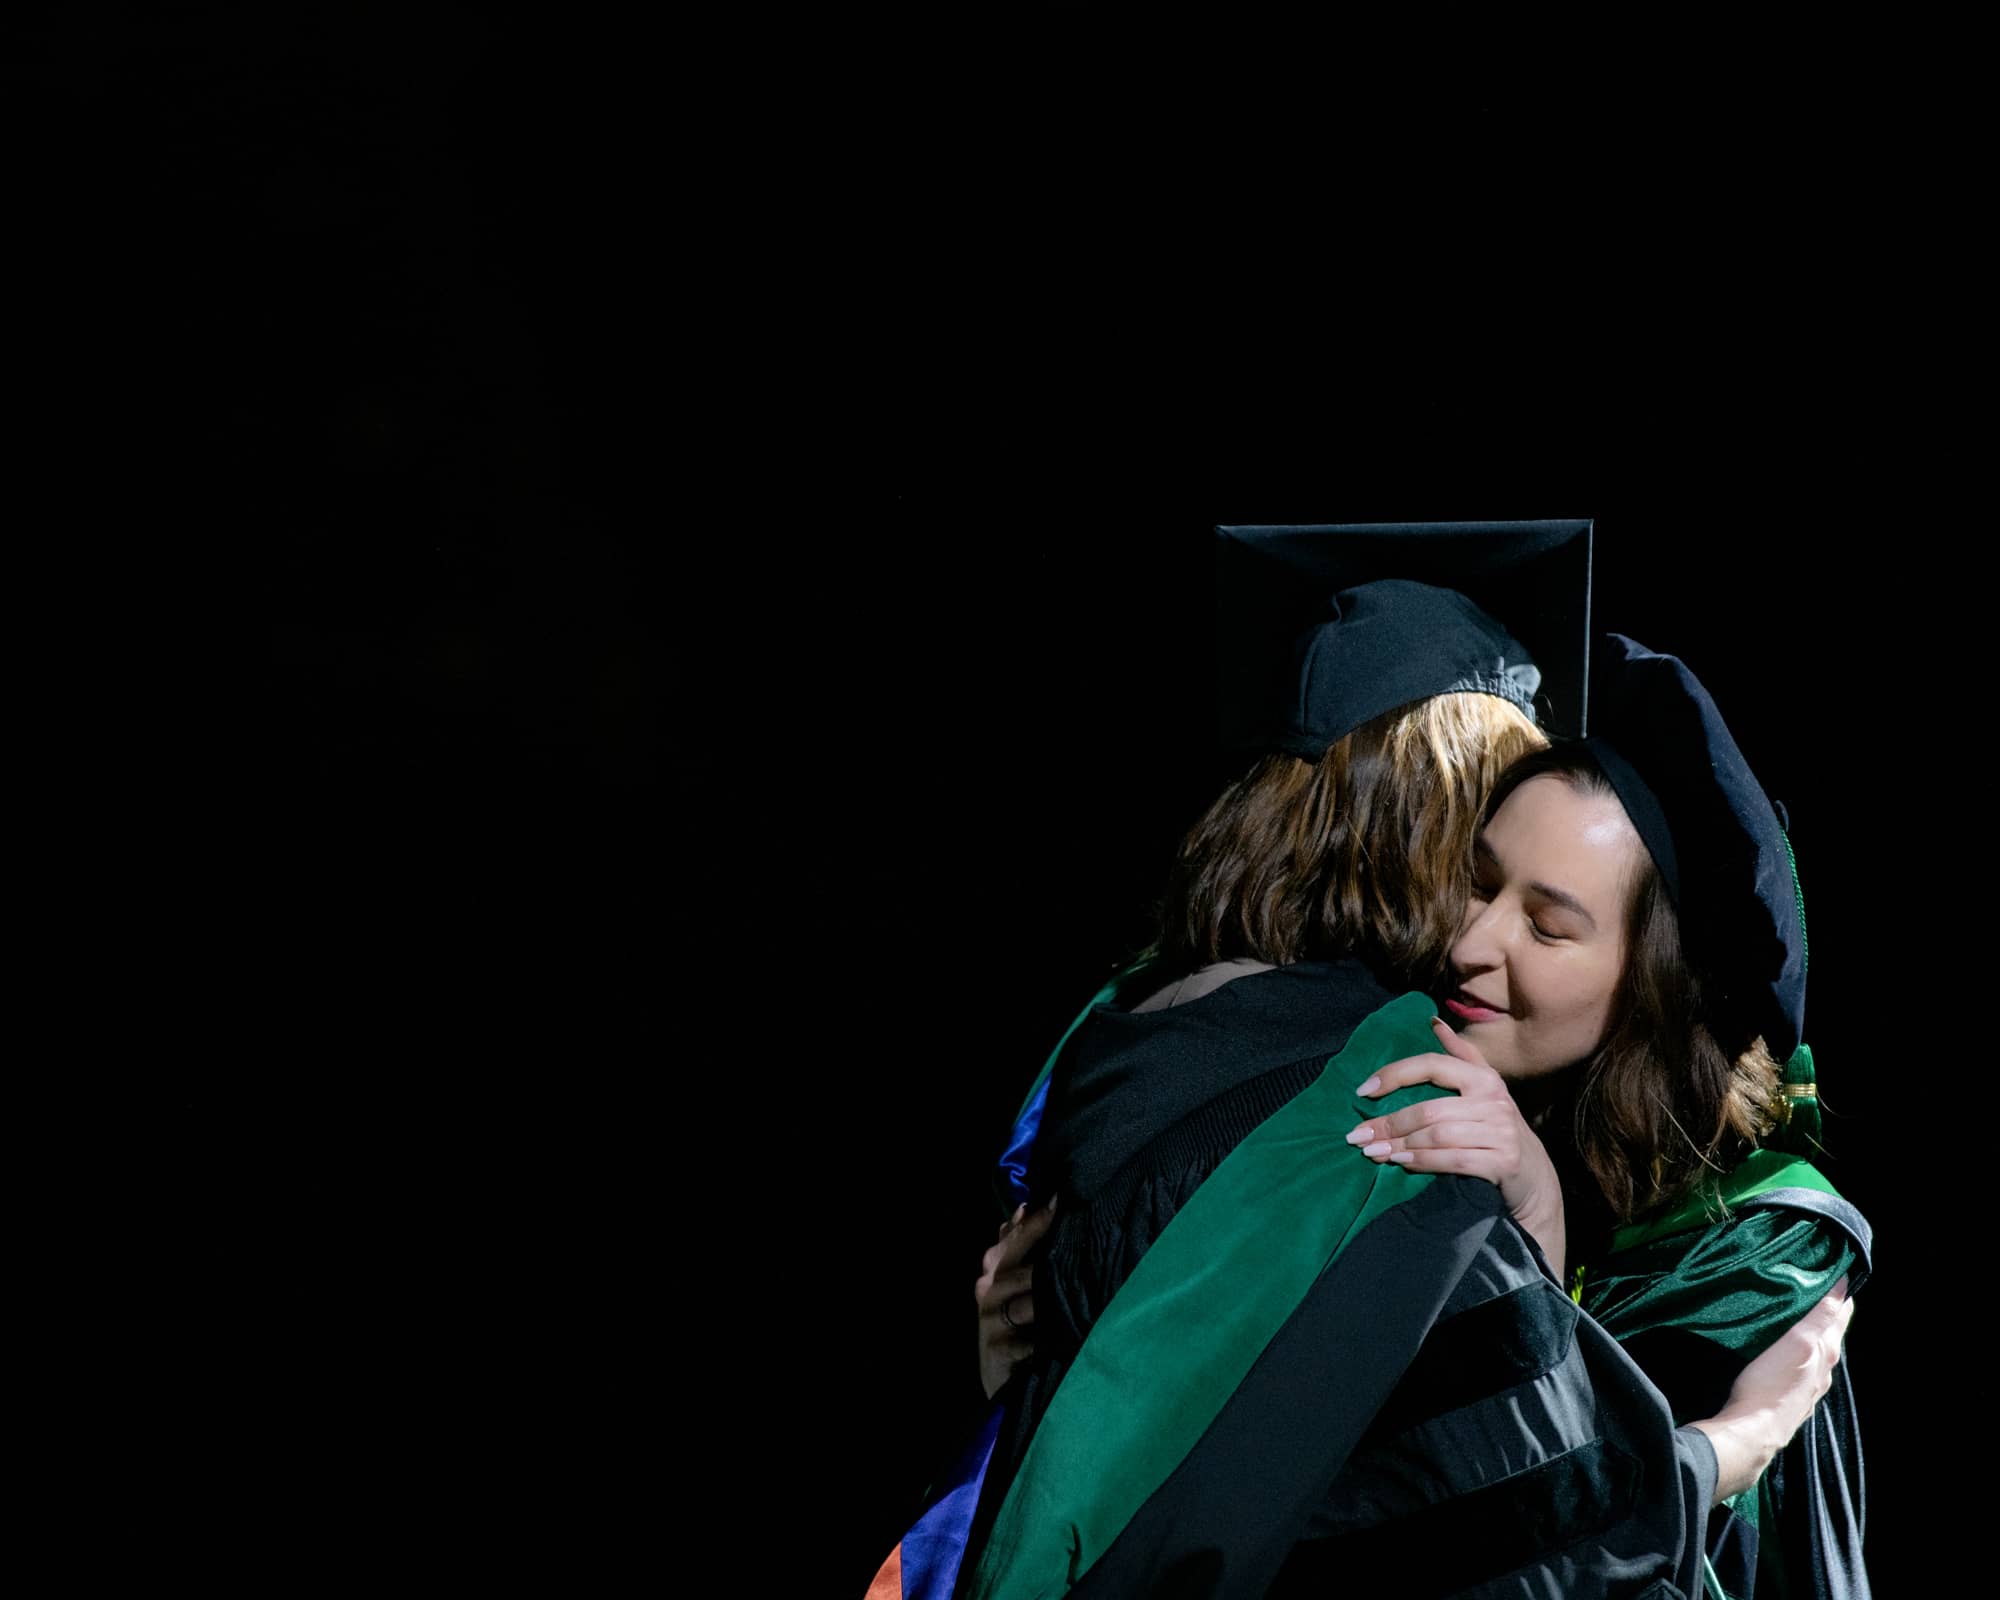 A Heritage College student is hugged by their mentor at commencement.